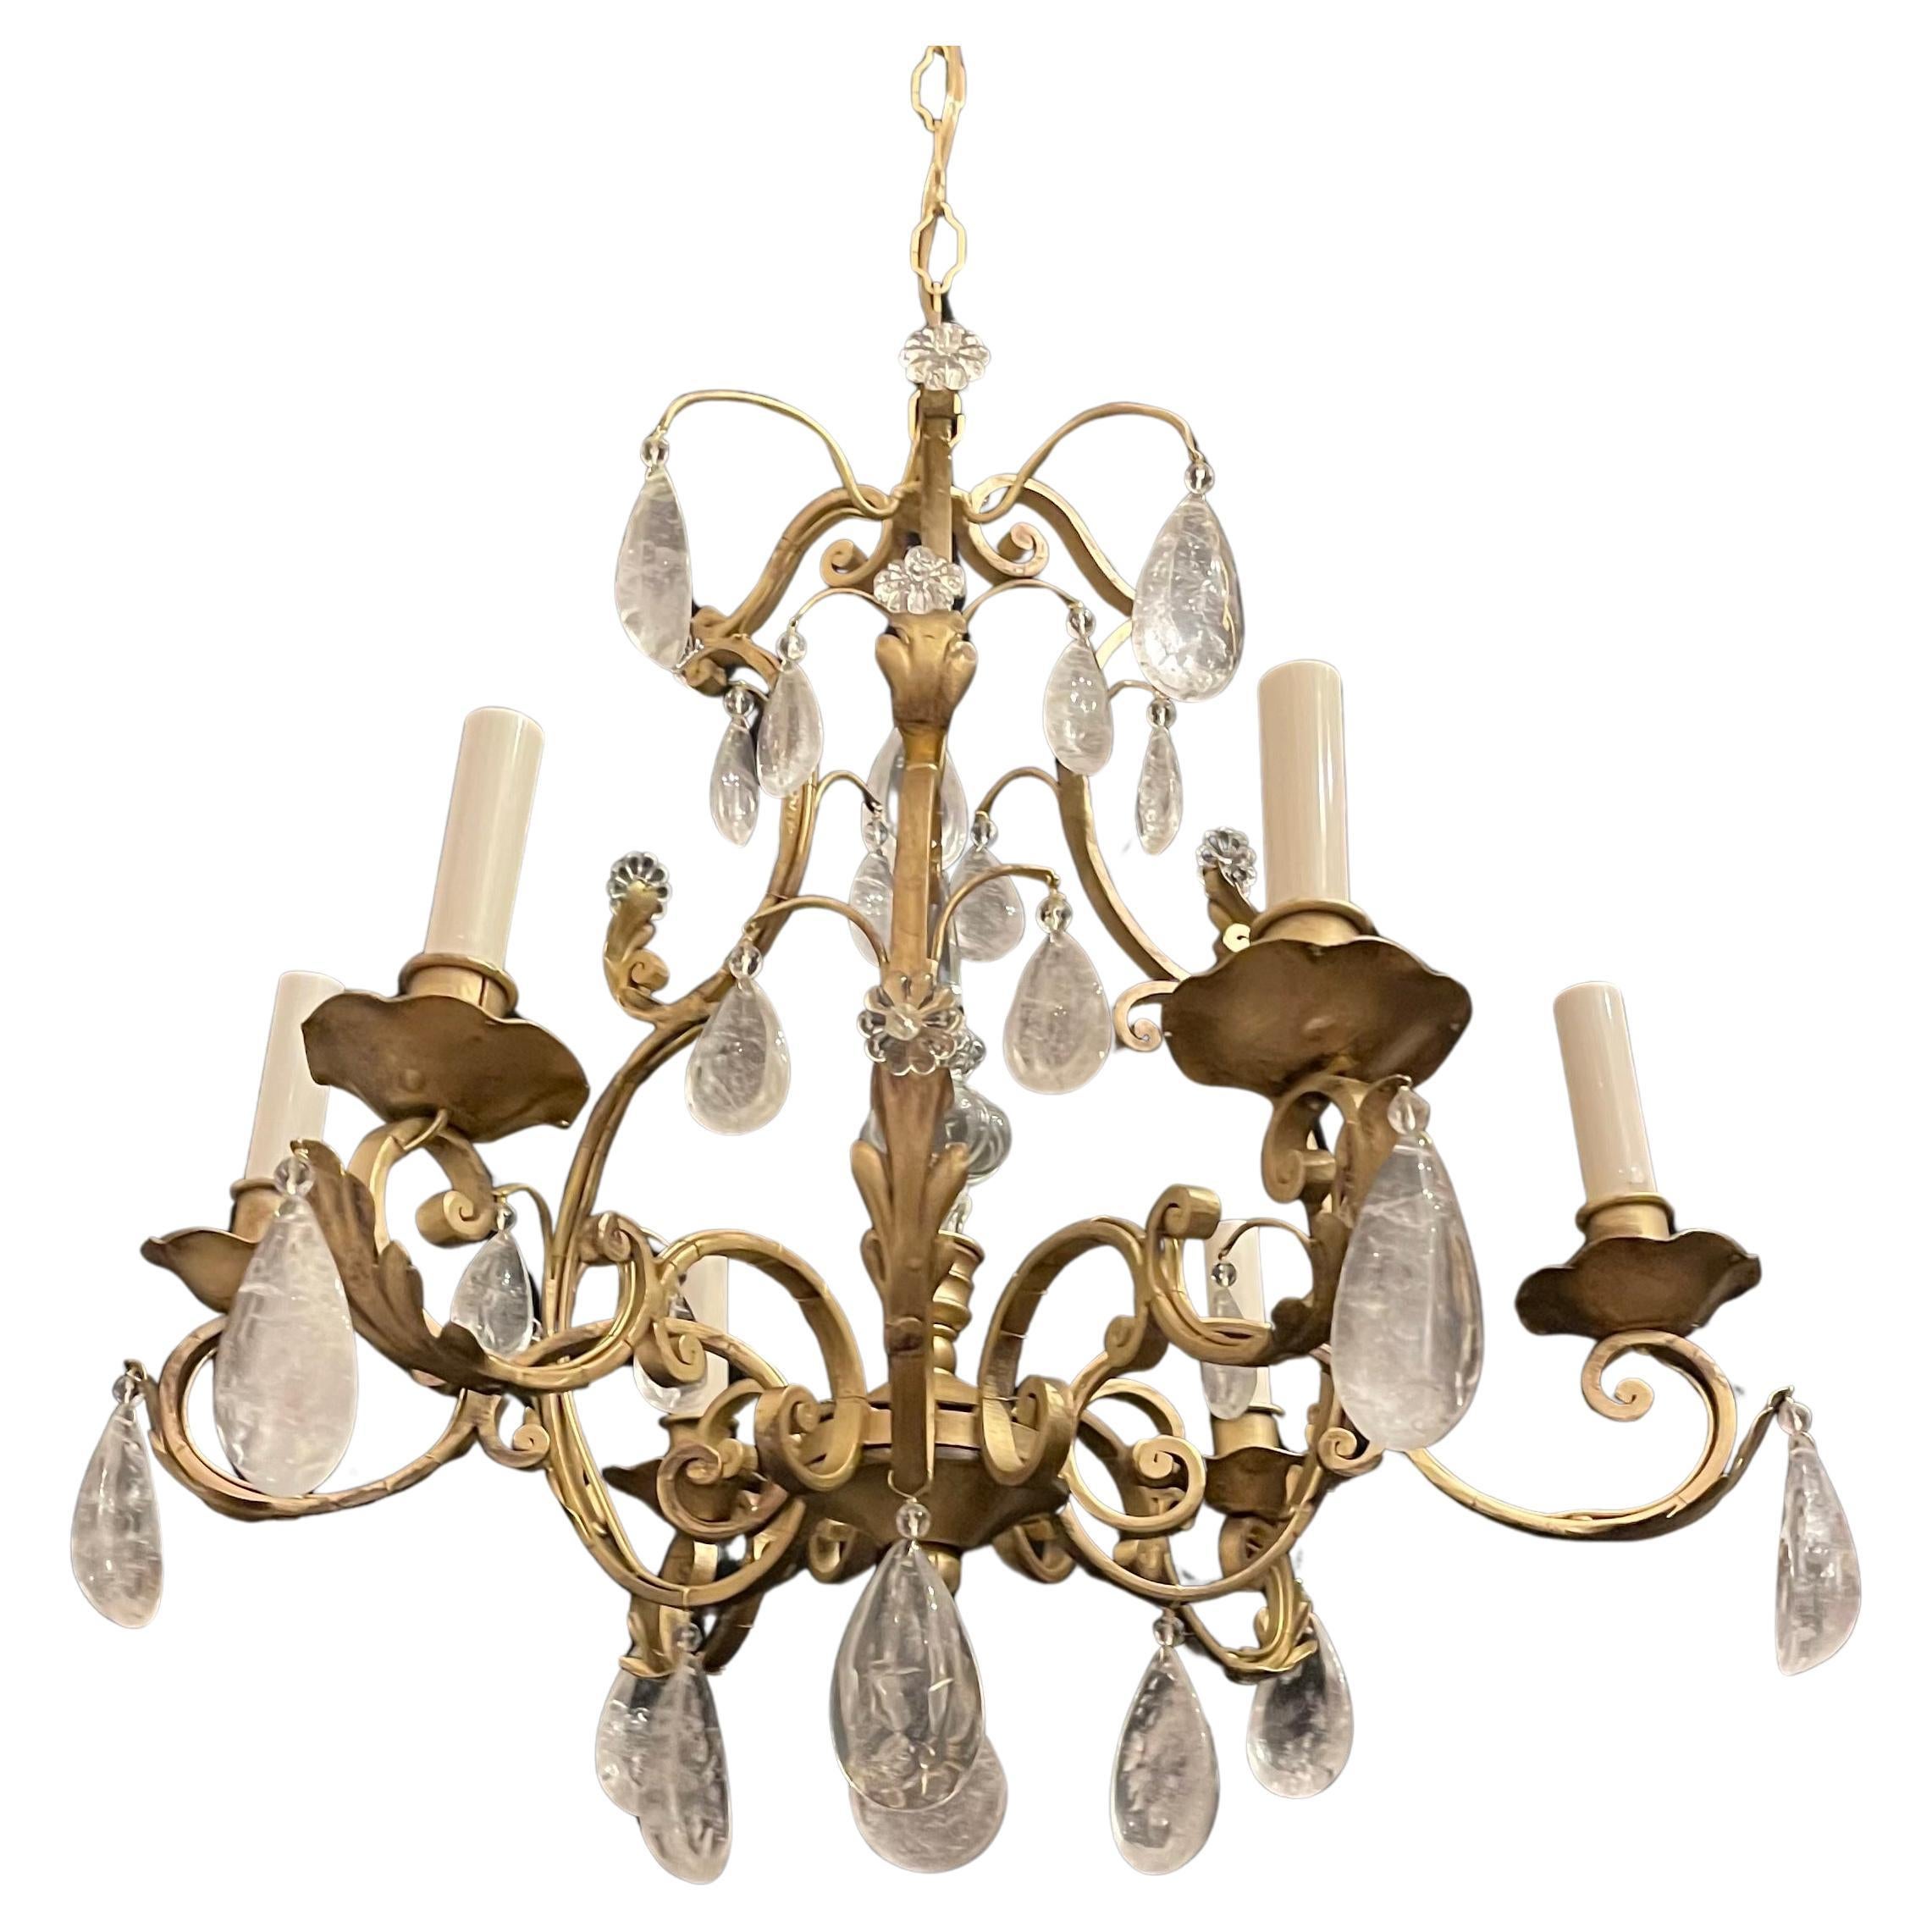 A Wonderful Petite Six Candelabra Light Maison Baguès Style Rock Crystal Gold Gilt French Bird Cage Chandelier, Completely Rewired With New Sockets For US Accompanied By Chain, Canopy And Mounting Hardware For Installation.